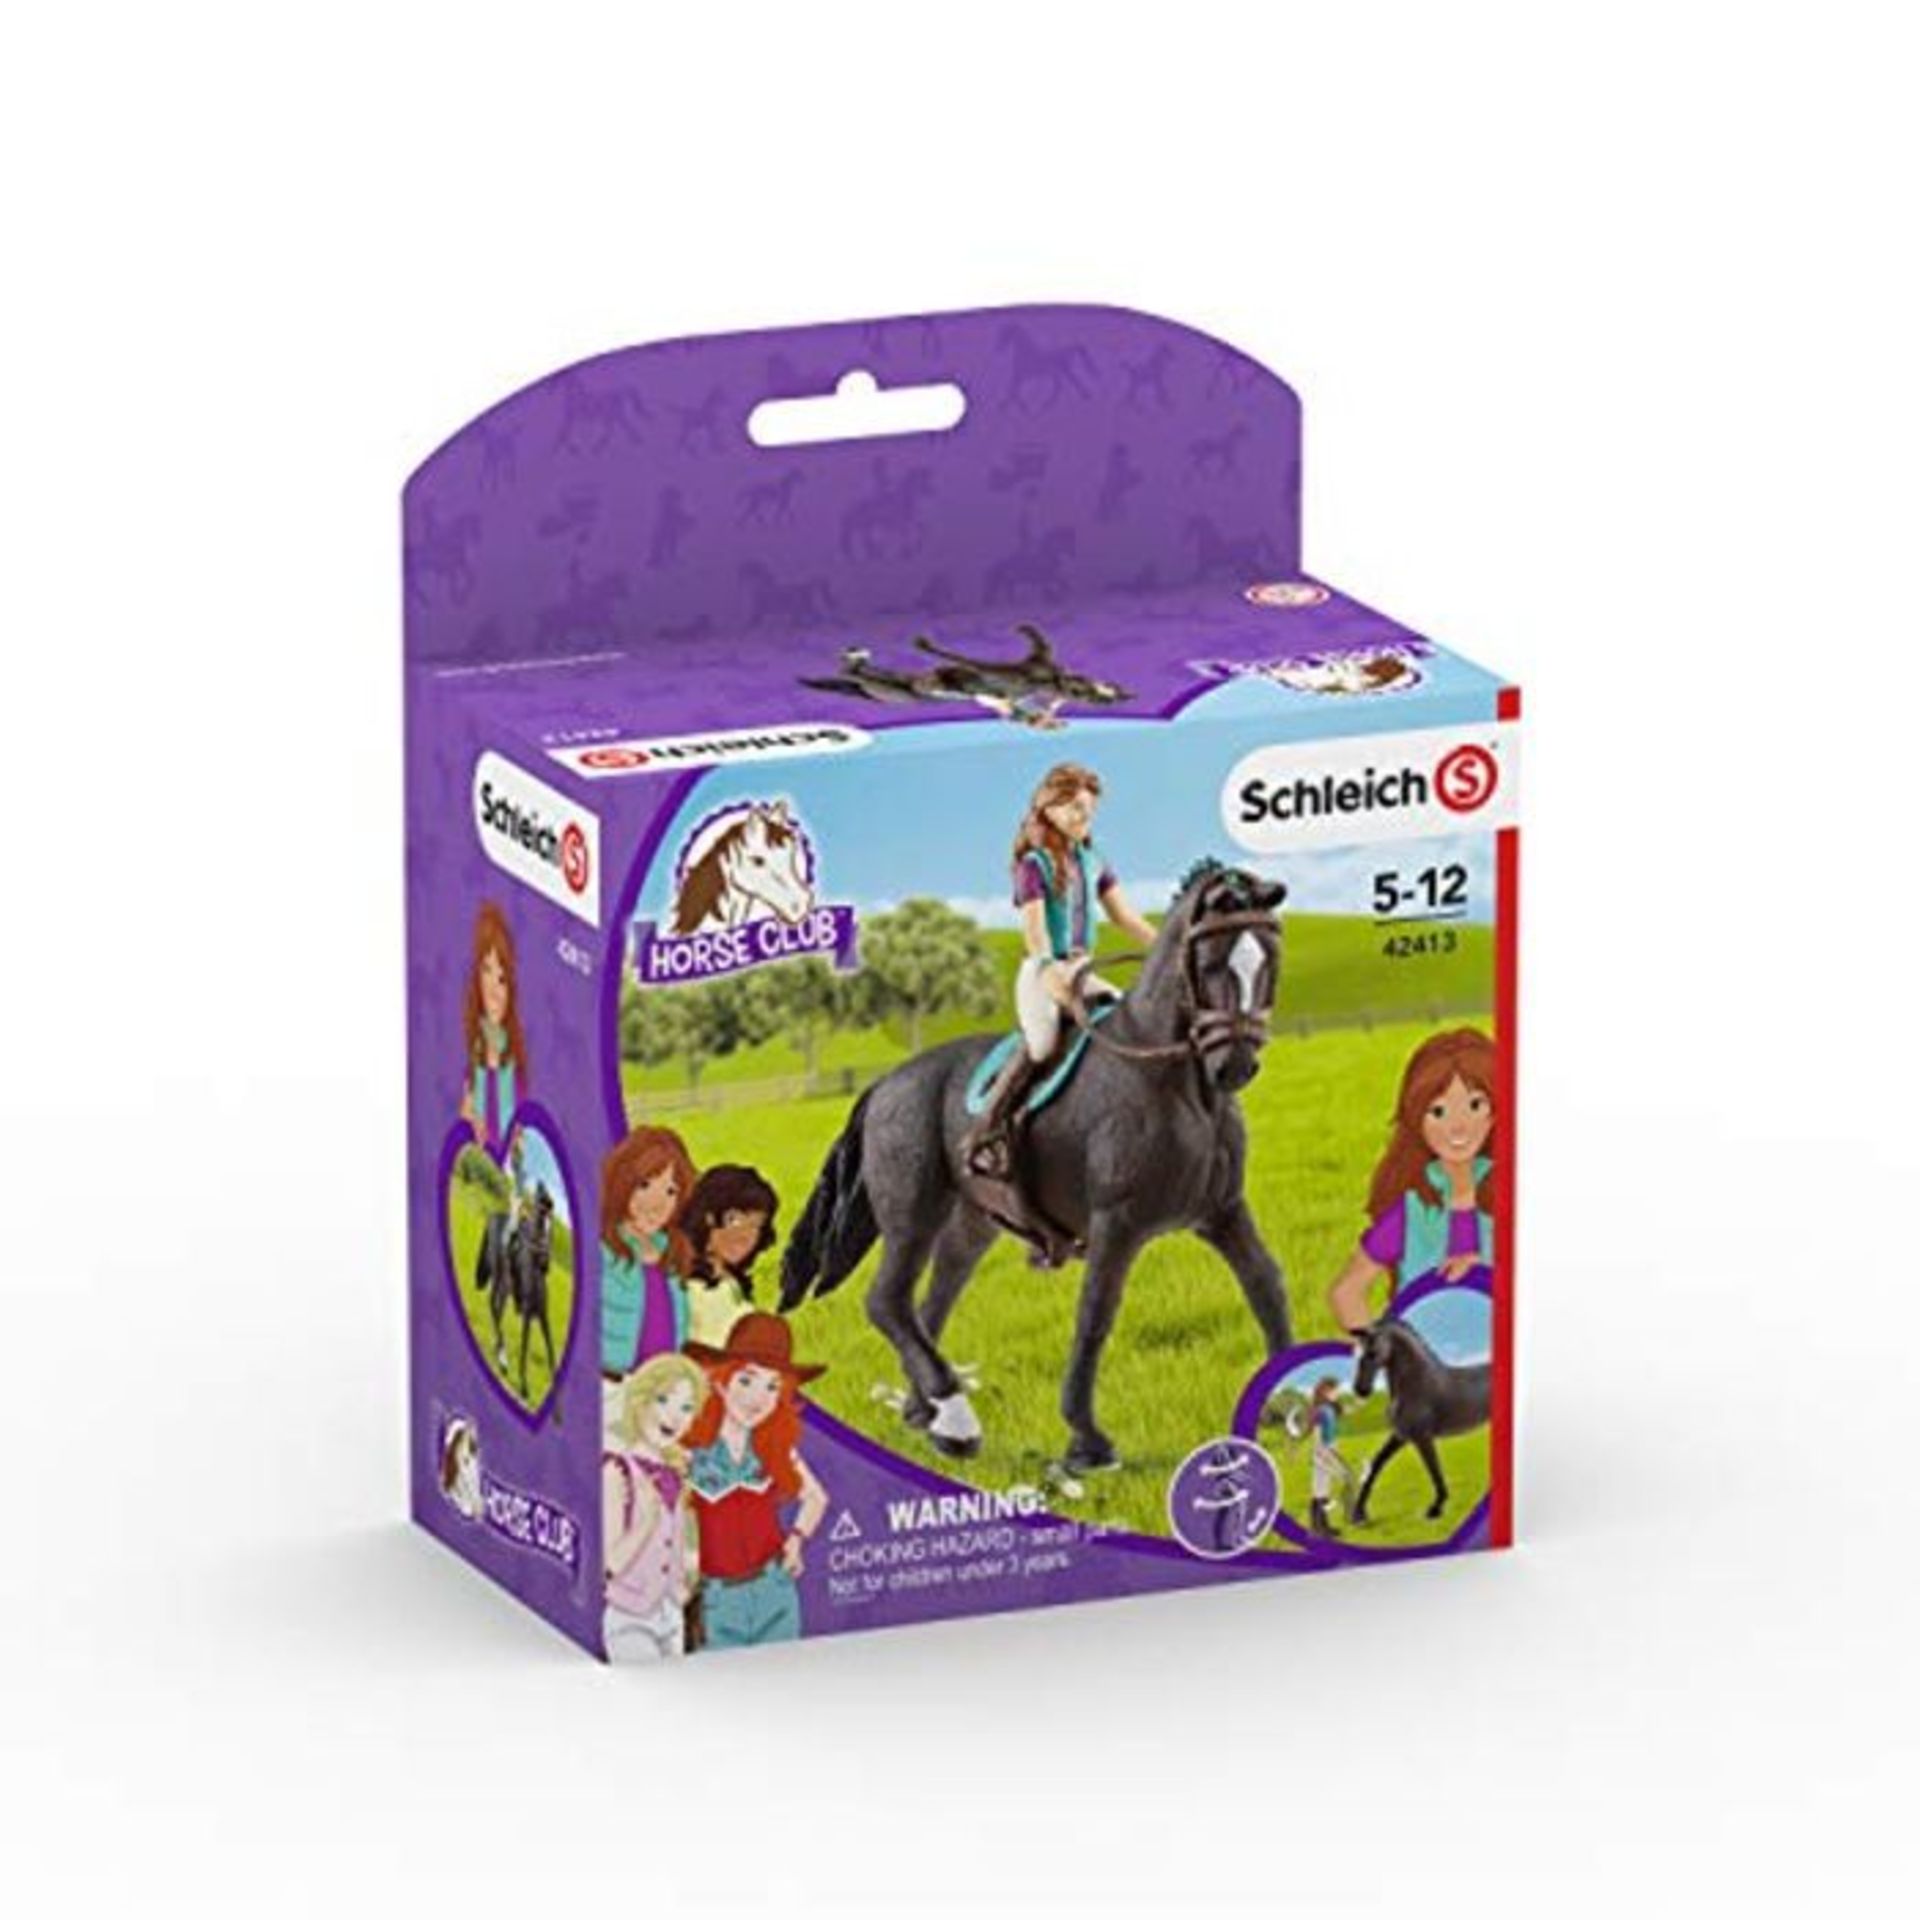 SCHLEICH ENT_552832 Horse Club Lisa and Storm Figure, Multi-Coloured